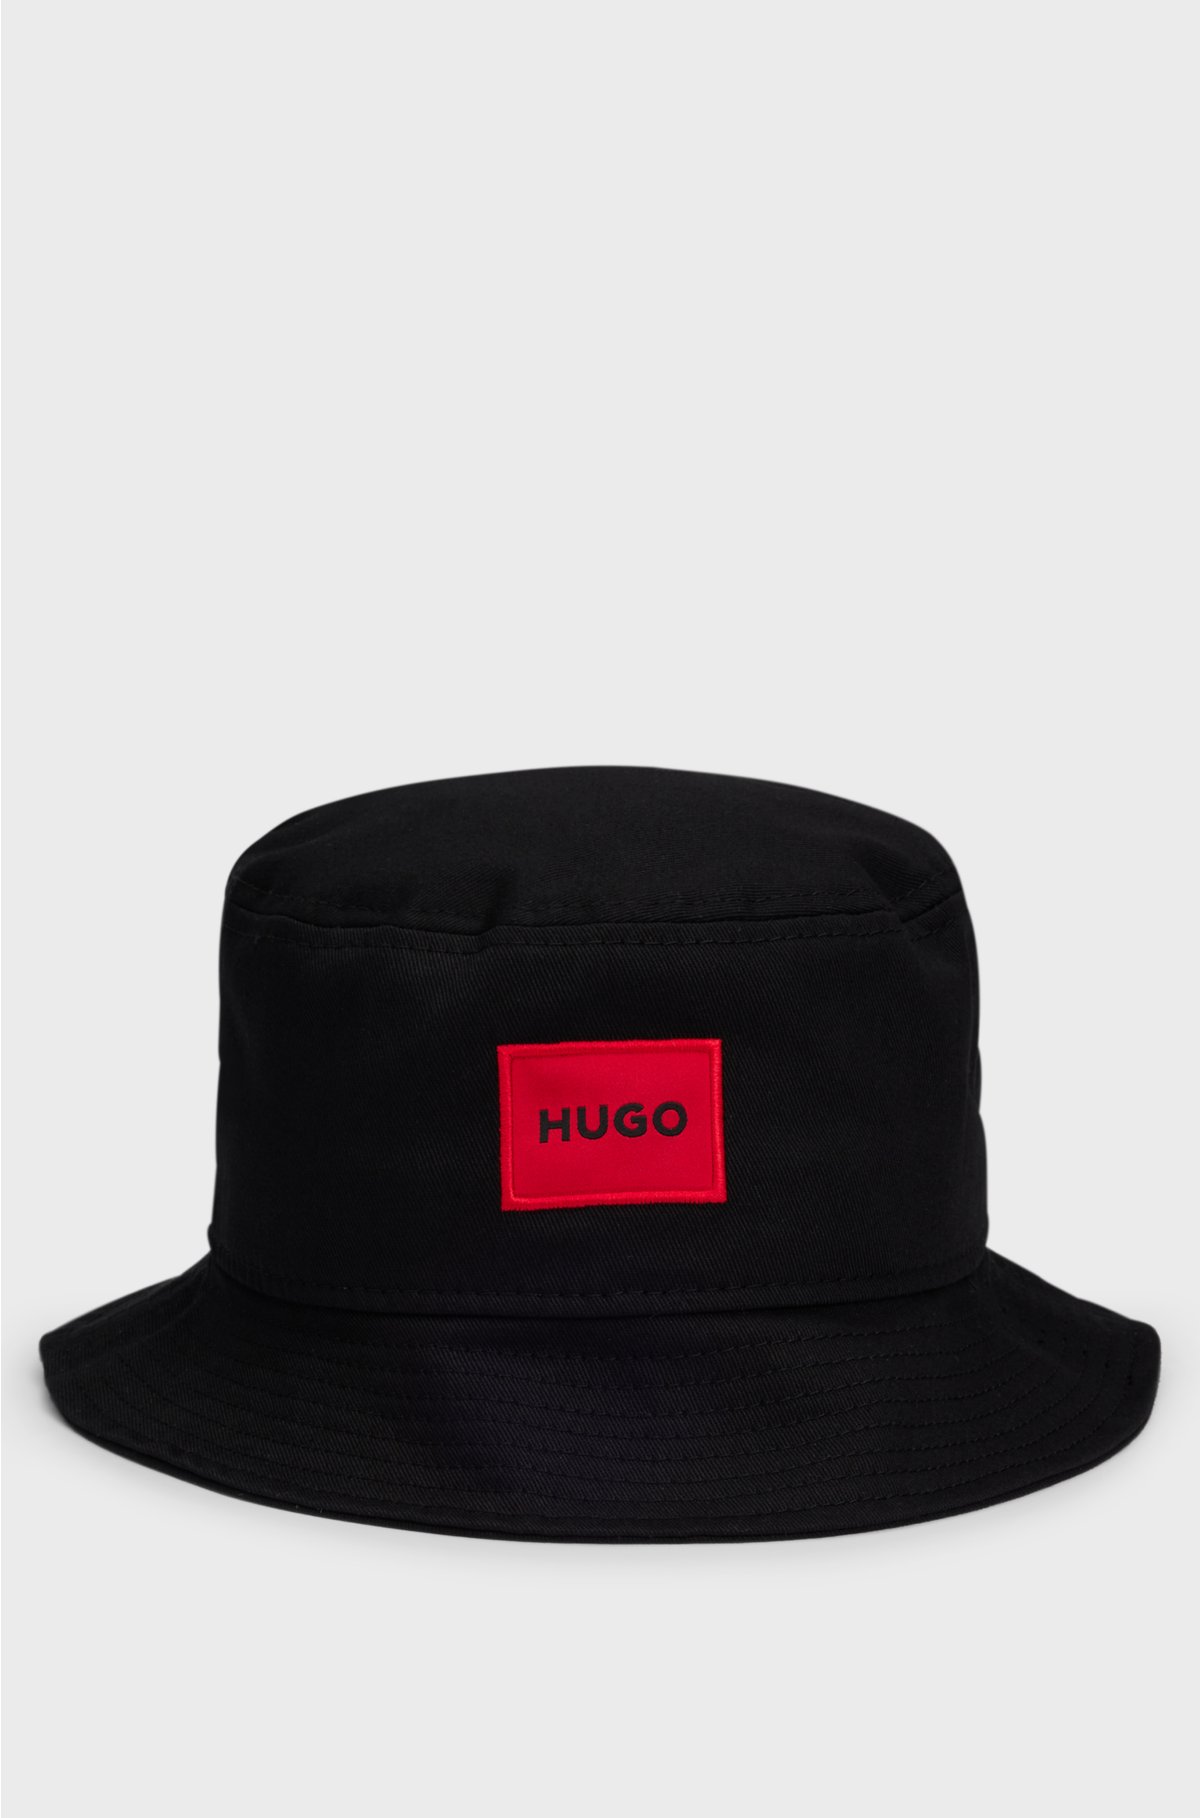 Bucket hat in cotton twill with red logo label, Black